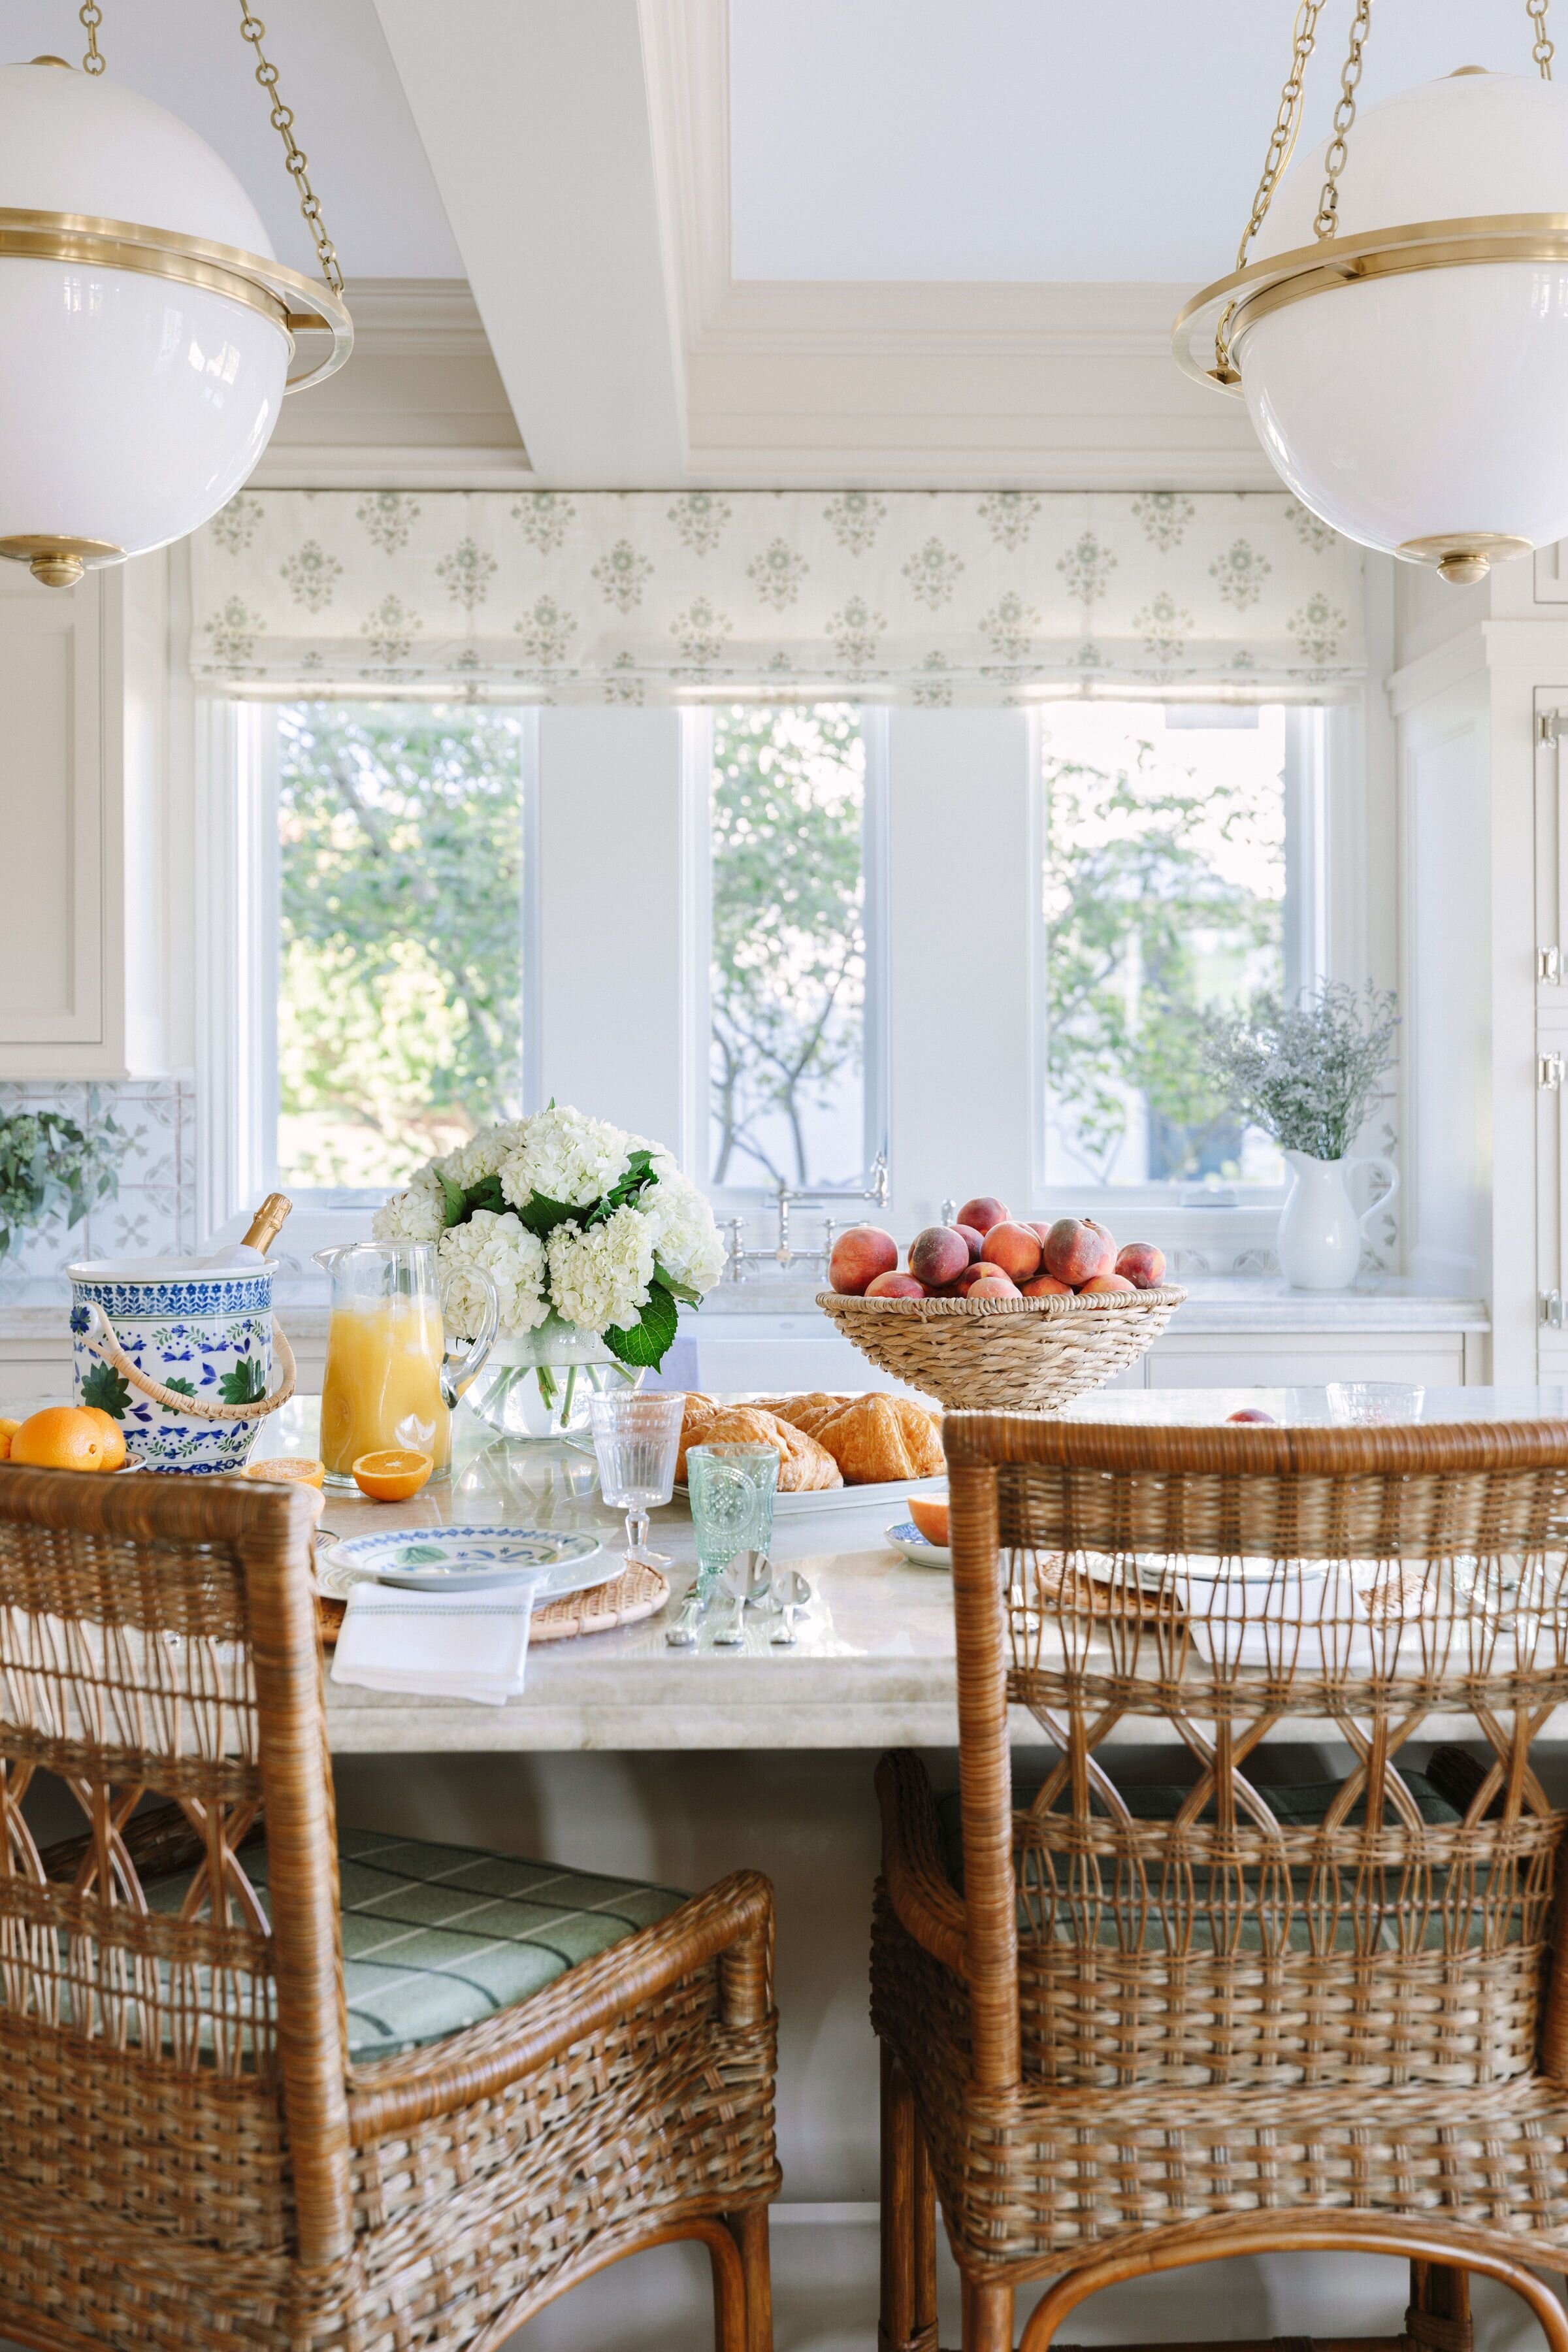 This beautiful space by Bria Hammel Interiors just might be the most perfect kitchen ever.